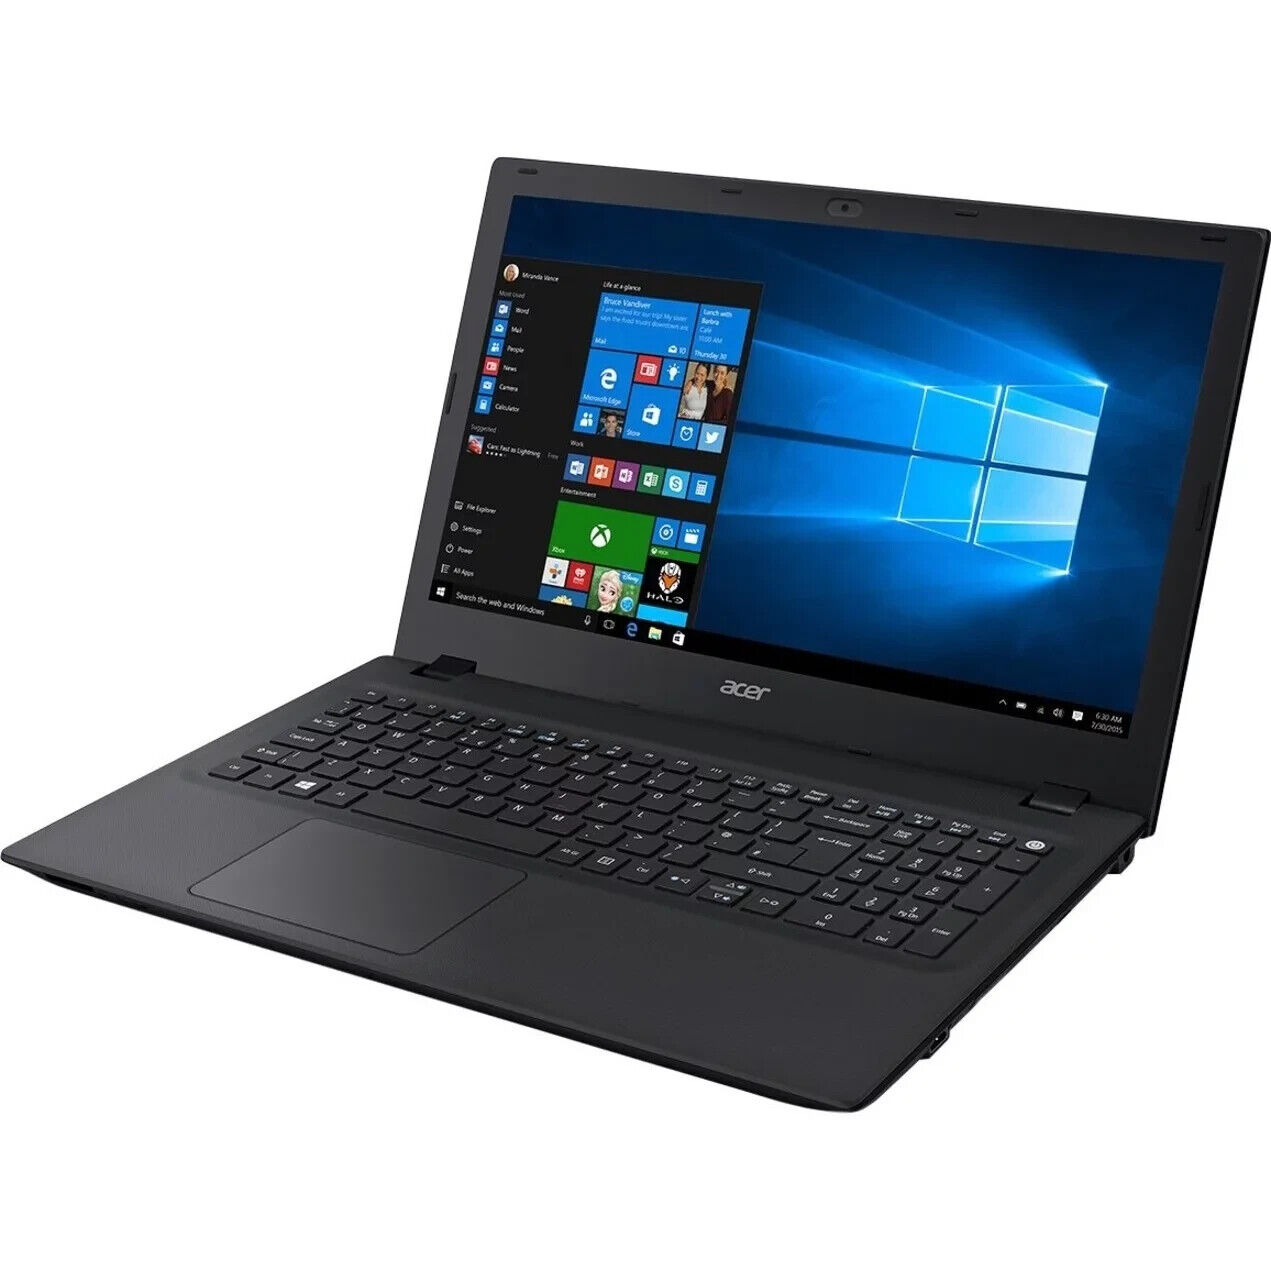 UPGRADED Acer TravelMate Laptop, Core i5, 16GB RAM, NEW 1TB SSD, Win10 Pro